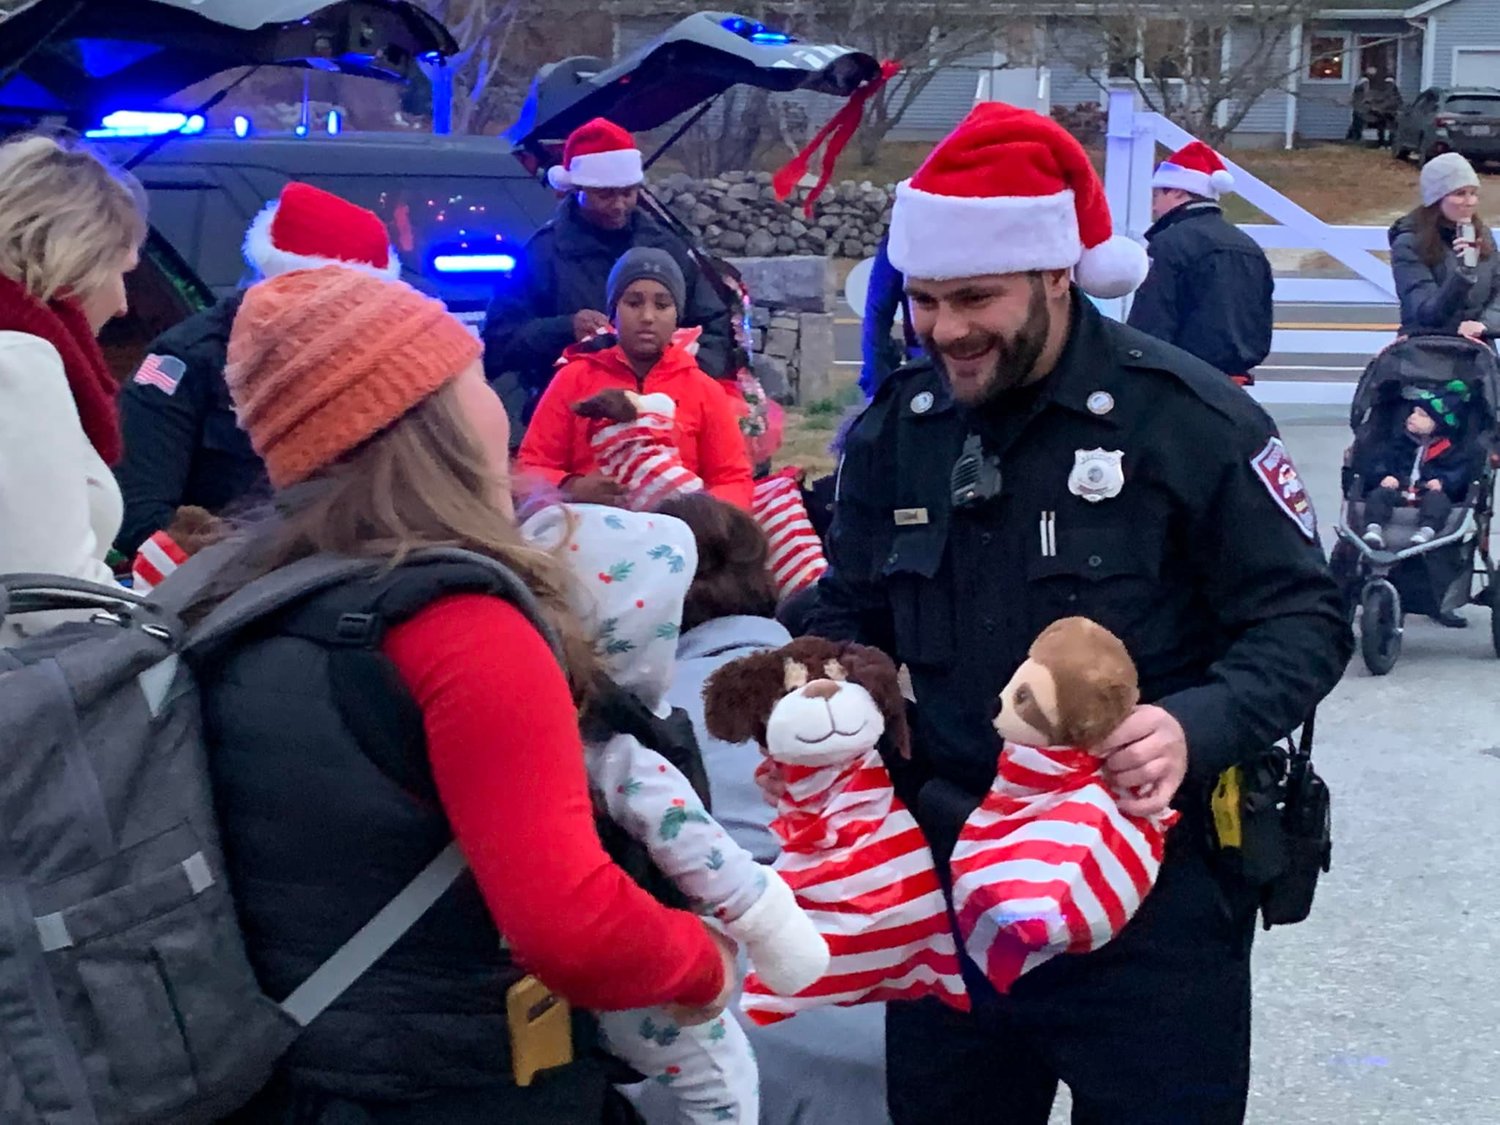 A Westport police officers shares toys with a young friend at last year's lighting festival.